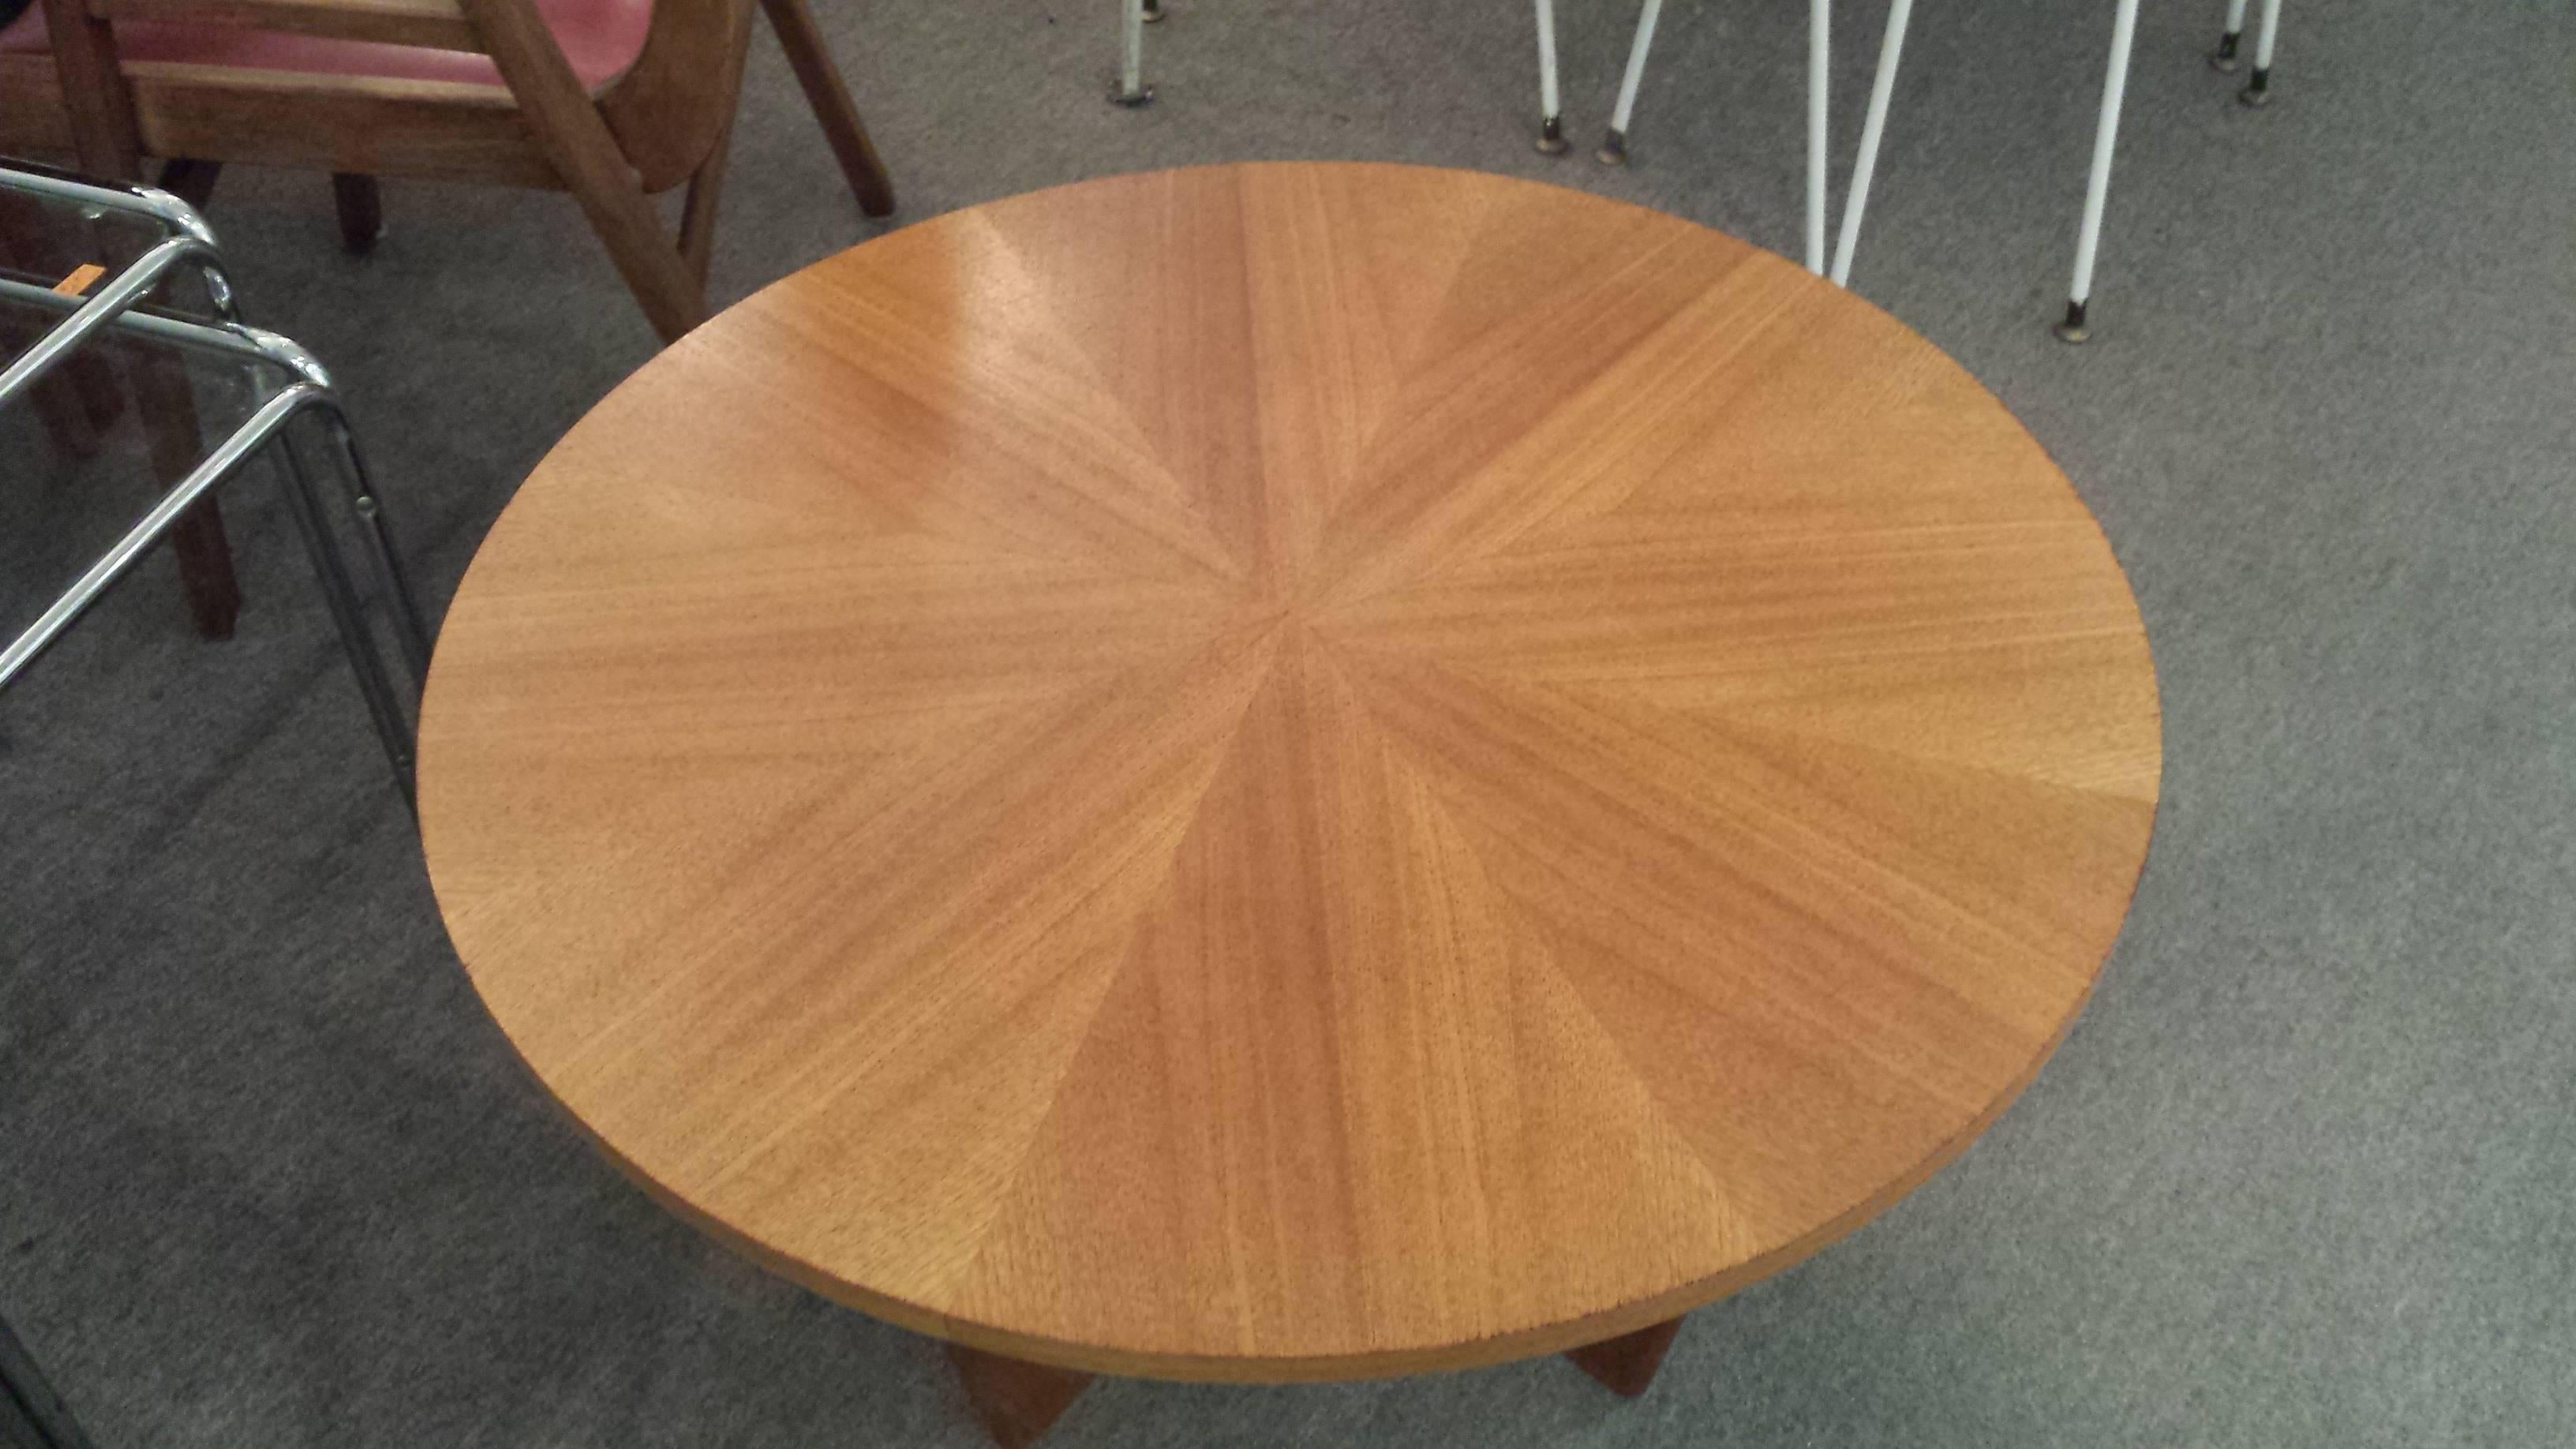 Danish Teak Circular Mid-Century Coffee Table, With Pie Shaped Veneered Top, On a Tapered leg cross base. The table measures 30 1/2